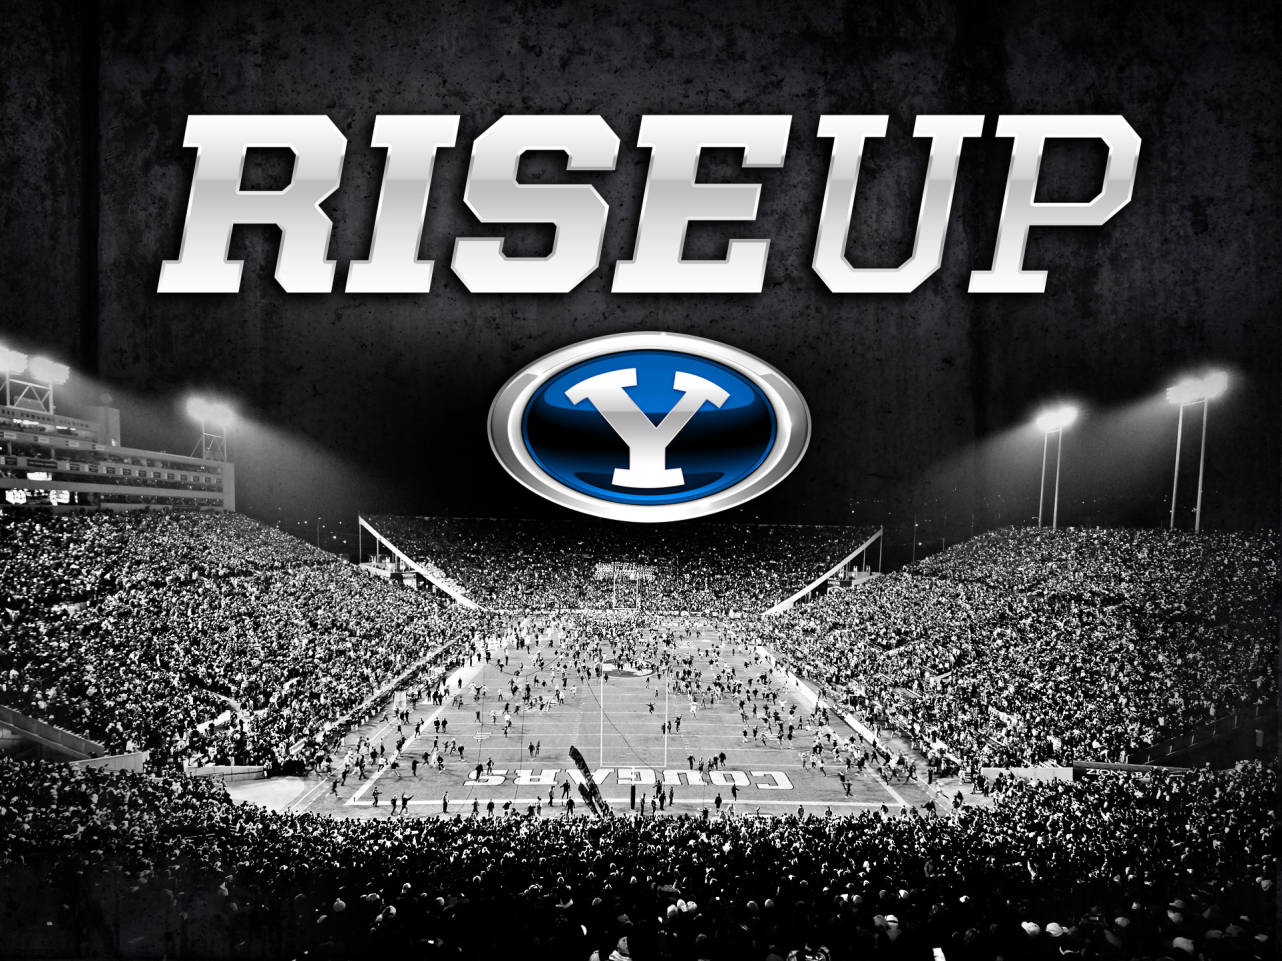 See Our Byu Football Guide For The Most Current Information